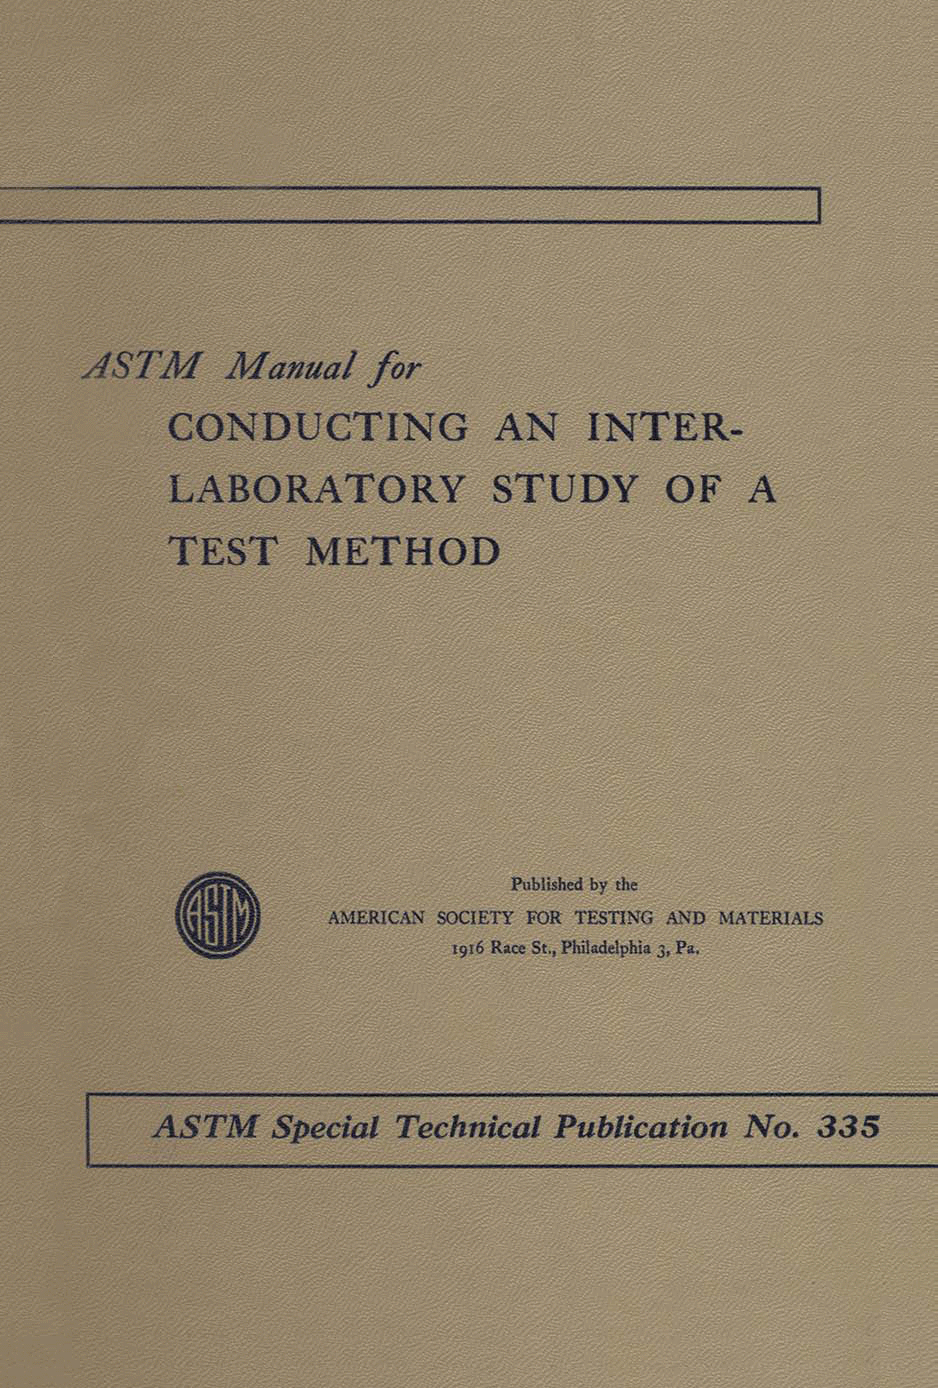 ASTM Manual for Conductiong an Interlaboratory Study of a Test Method